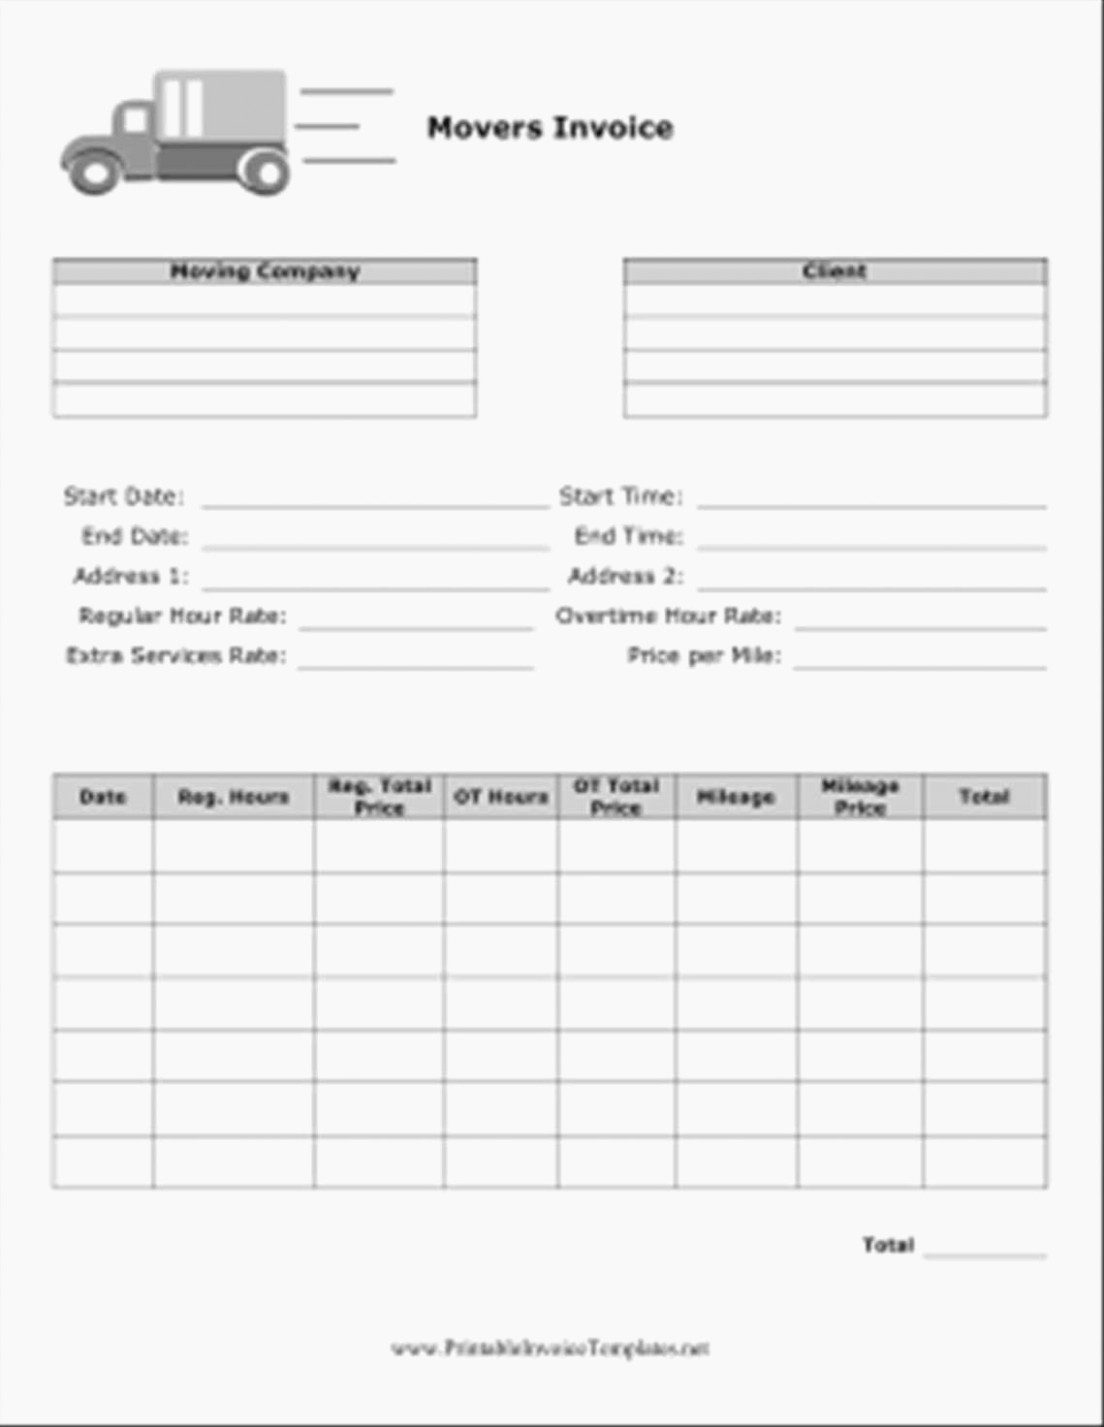 Moving Company Invoice Template Awesome 15 Things You Should Do In